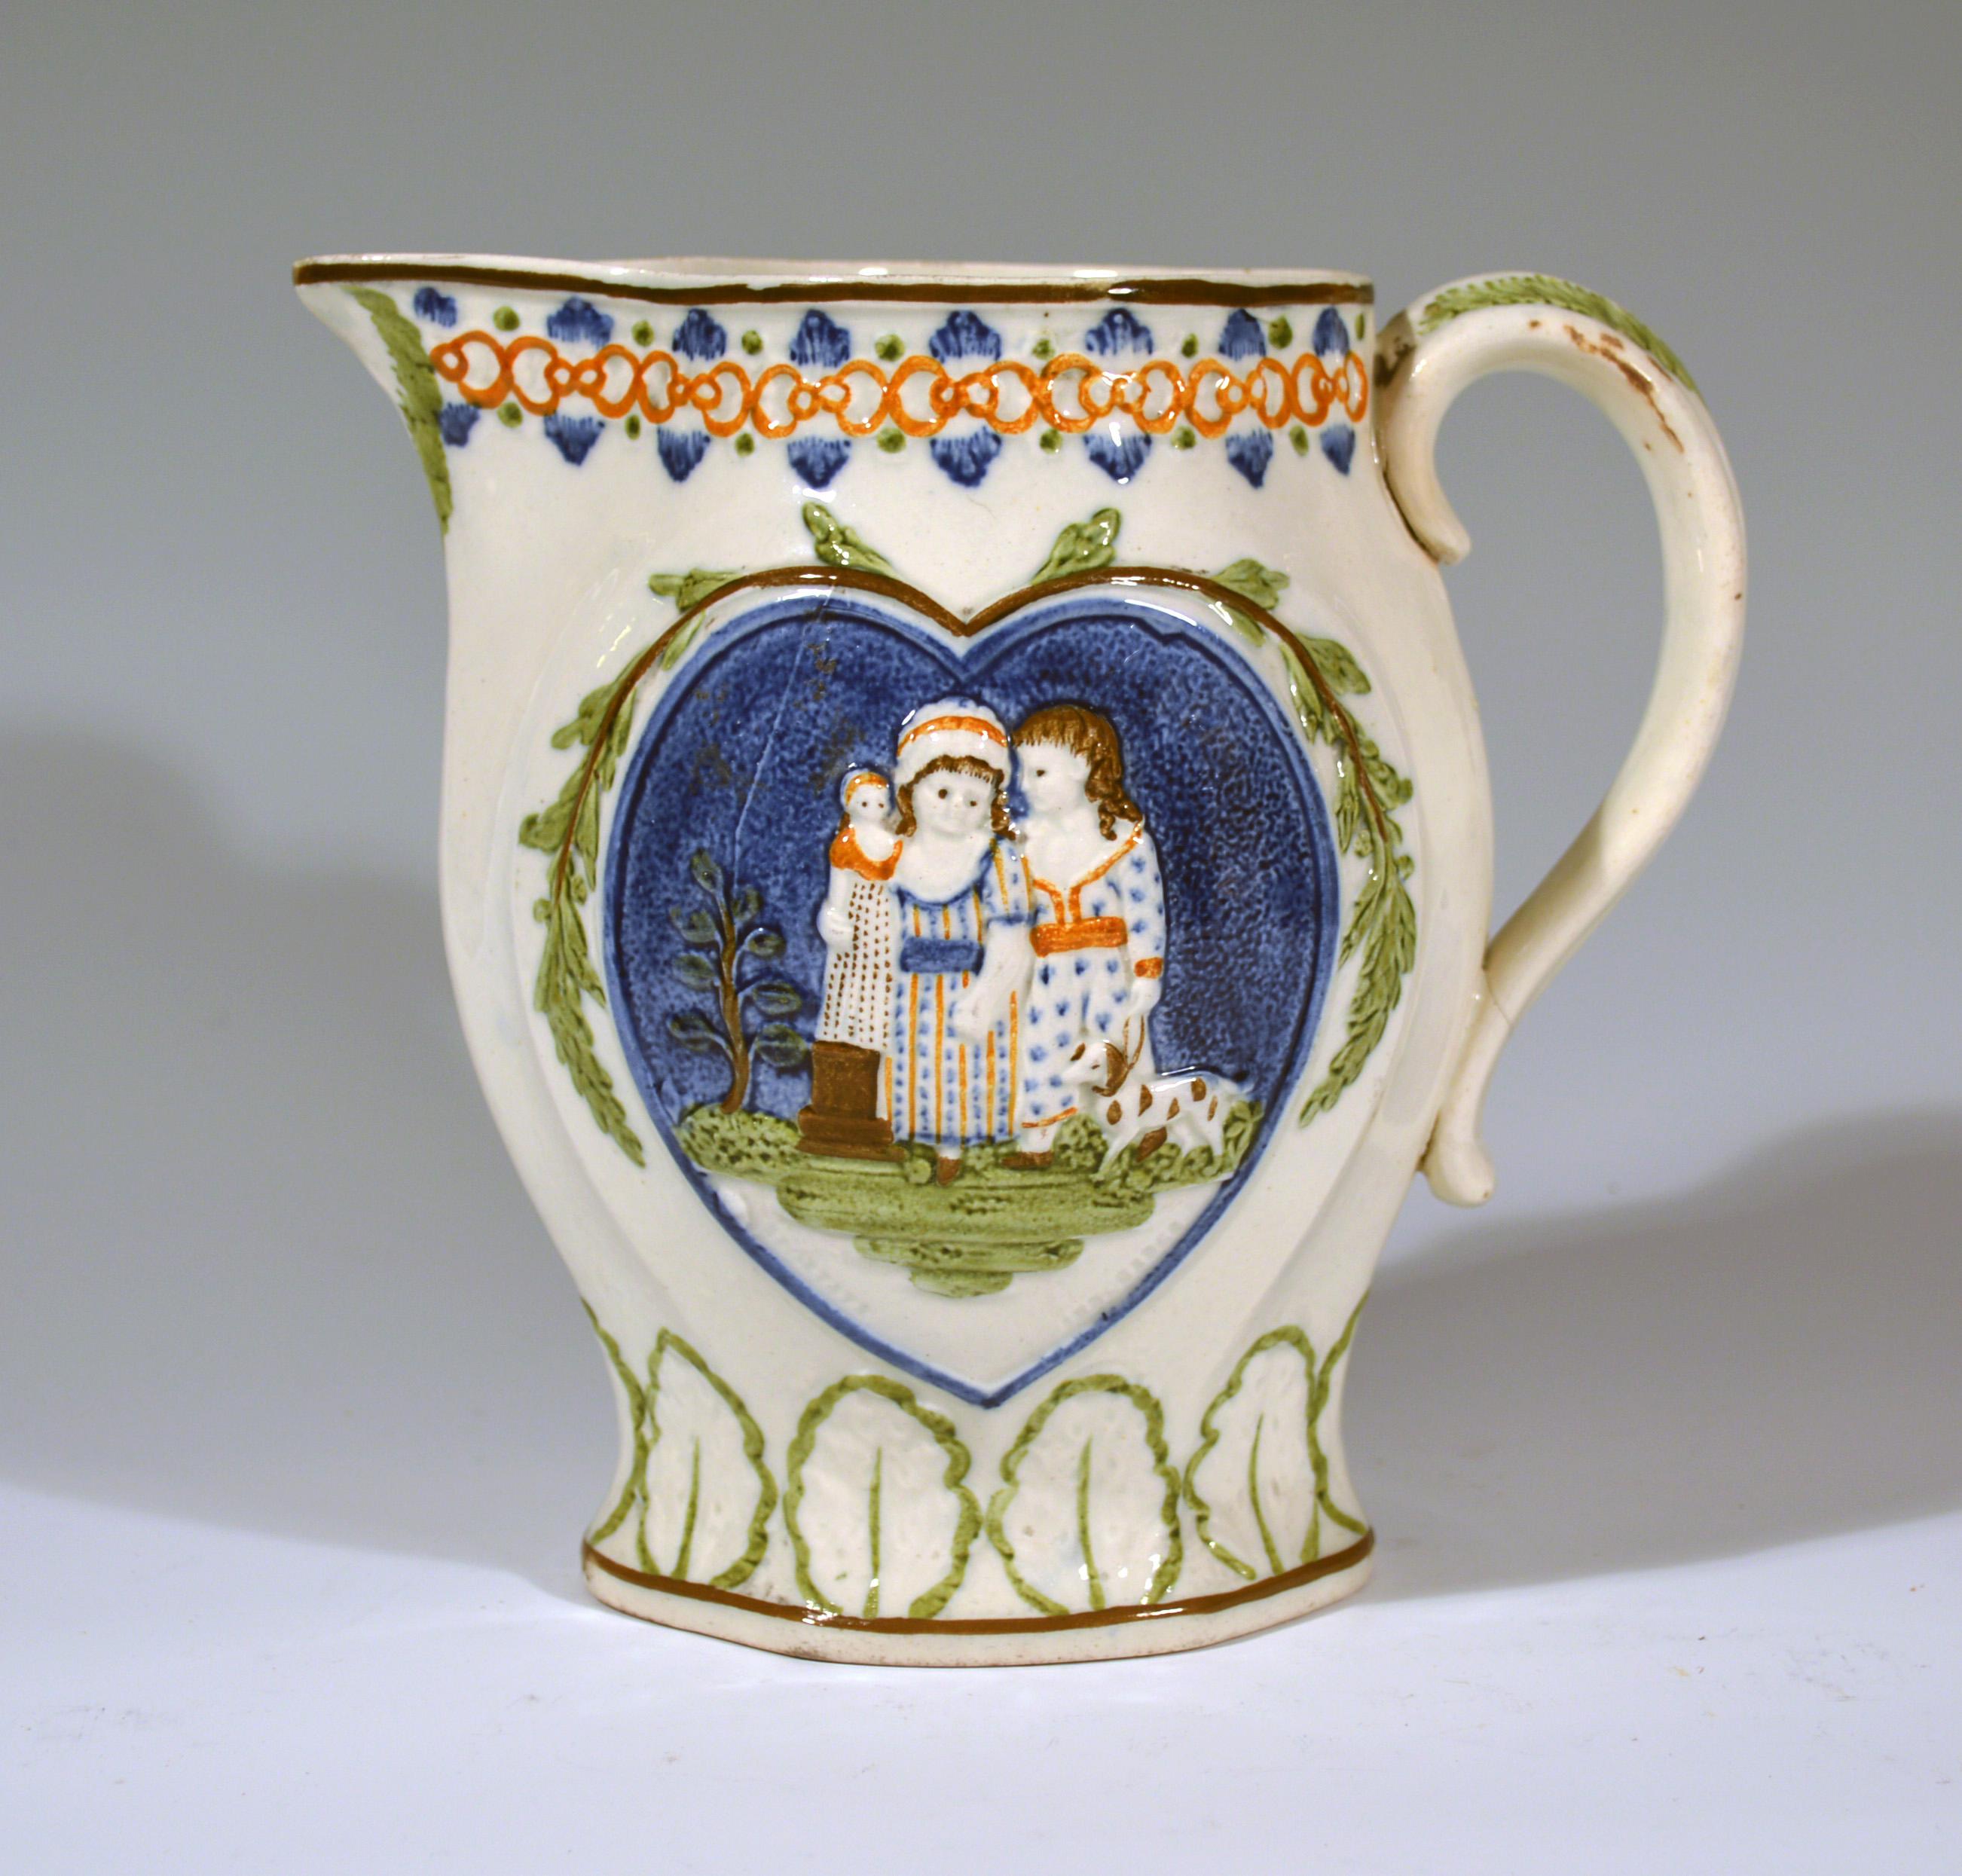 Prattware Pearlware Jug with Children with Heart-Shaped Panels, 1810-1820 1